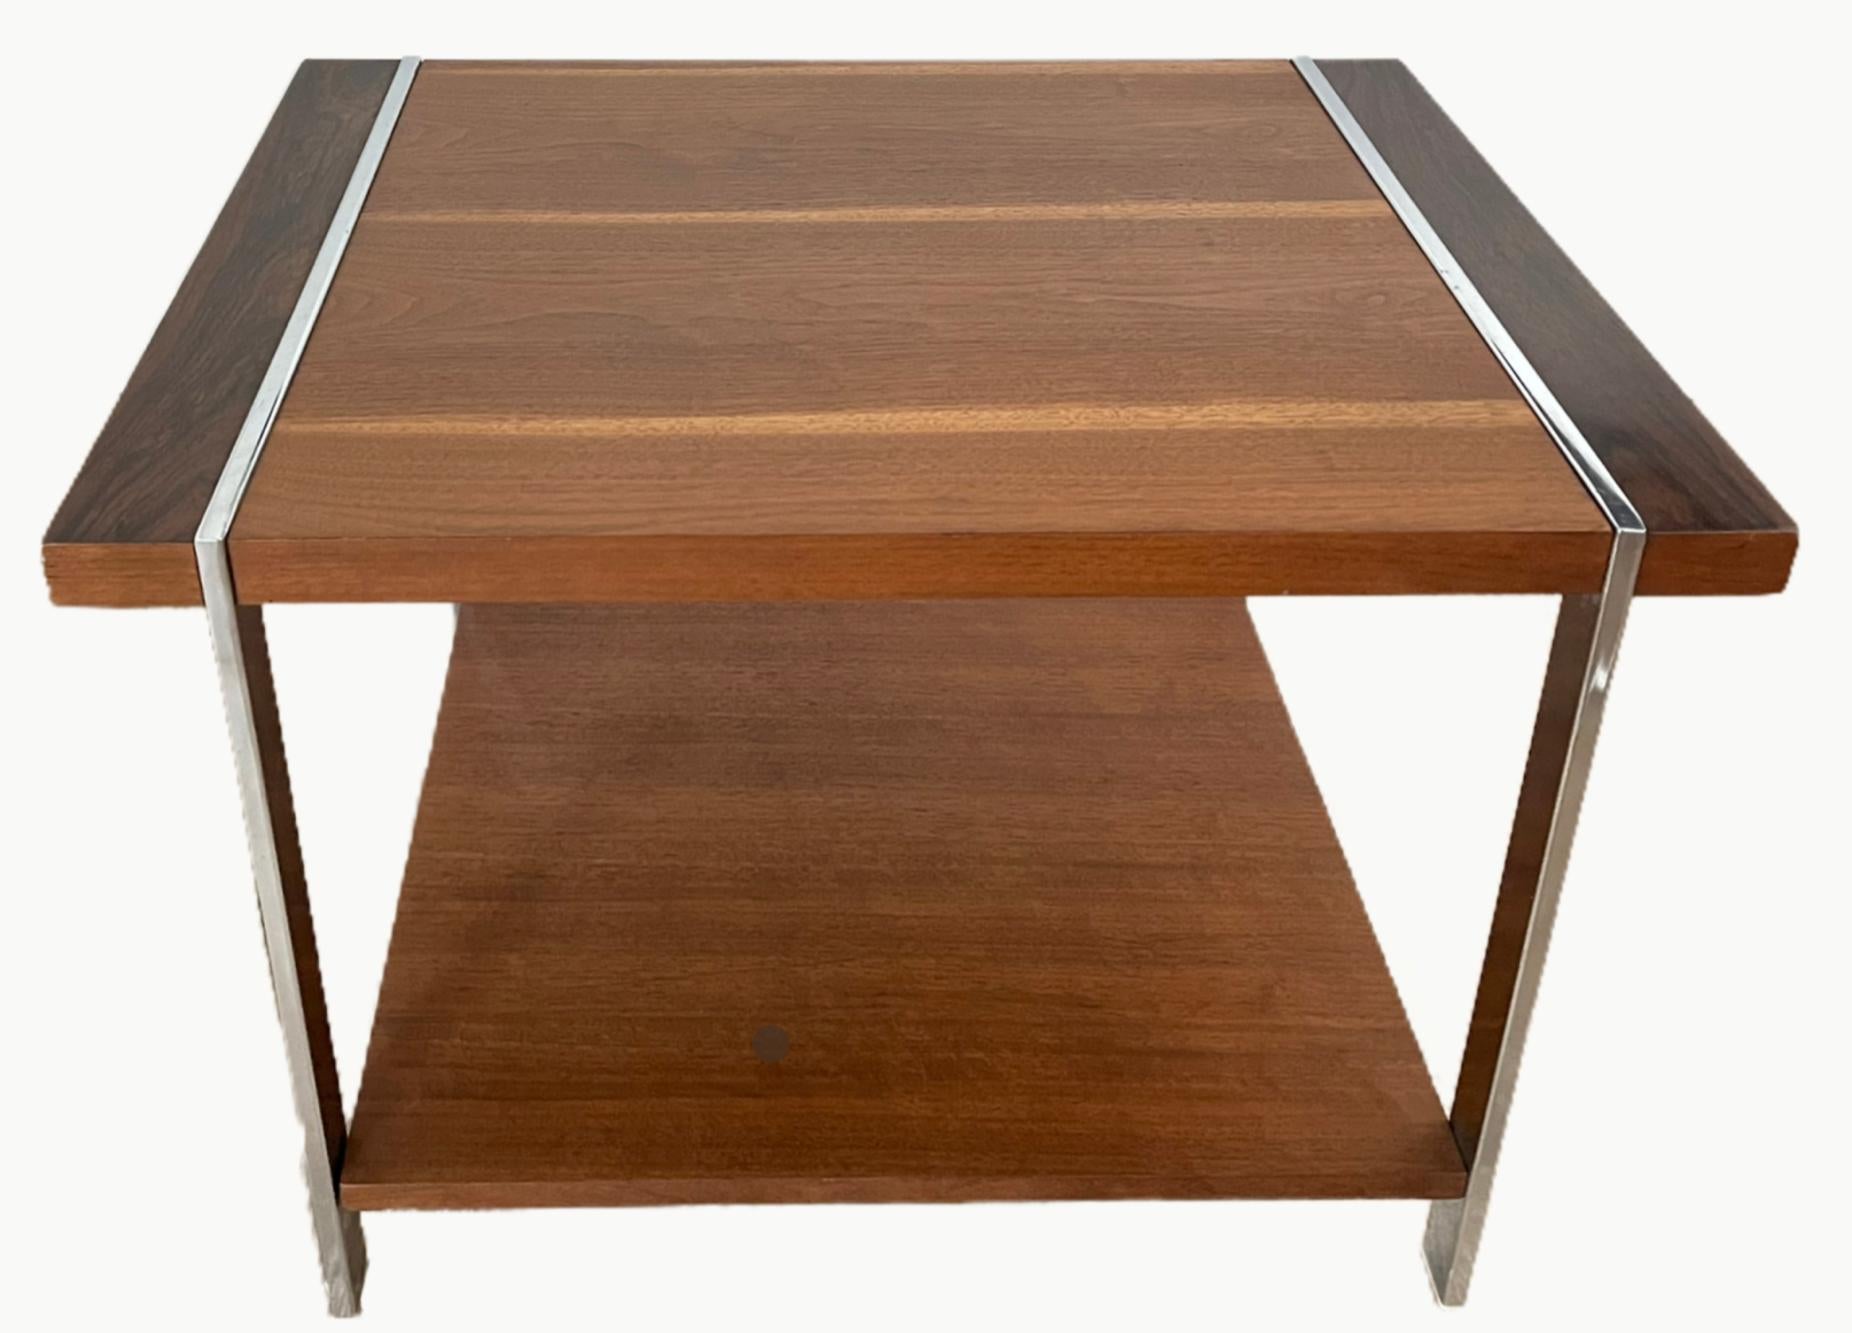 Mid-Century Modern walnut and chrome side table by Lane Furniture.